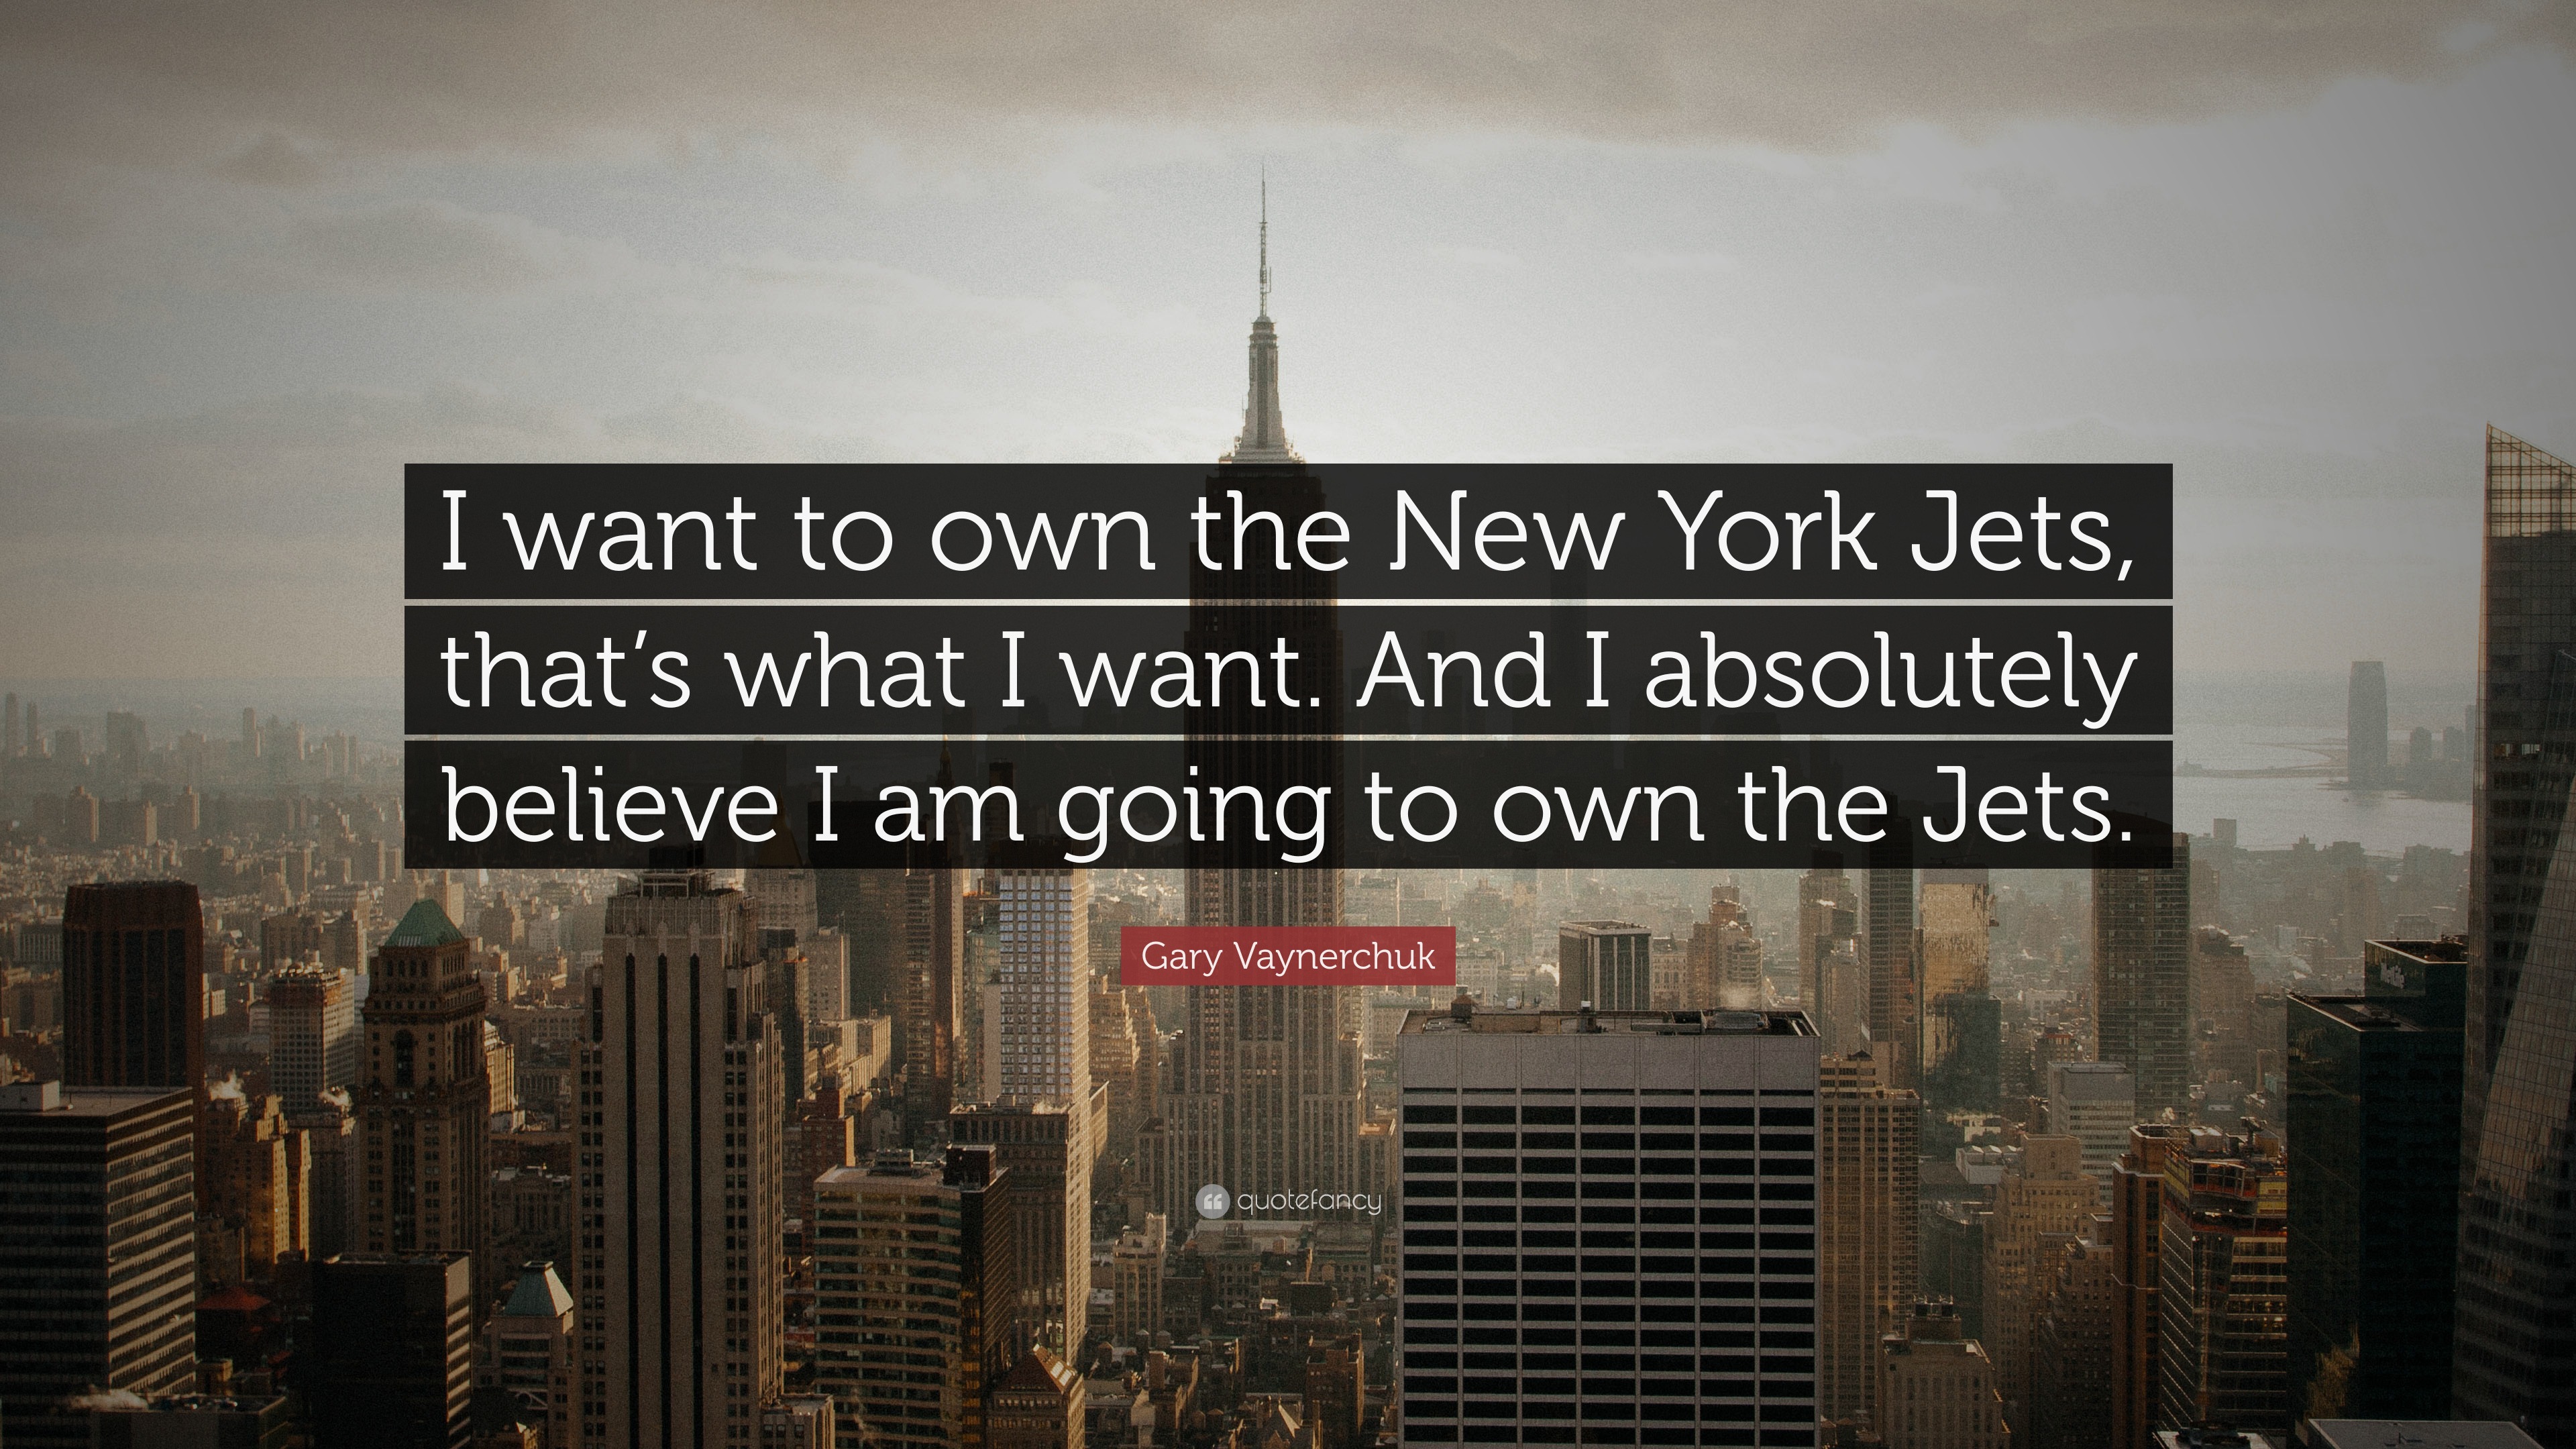 Gary Vaynerchuk Quote: “I want to own the New York Jets, that's what I  want. And